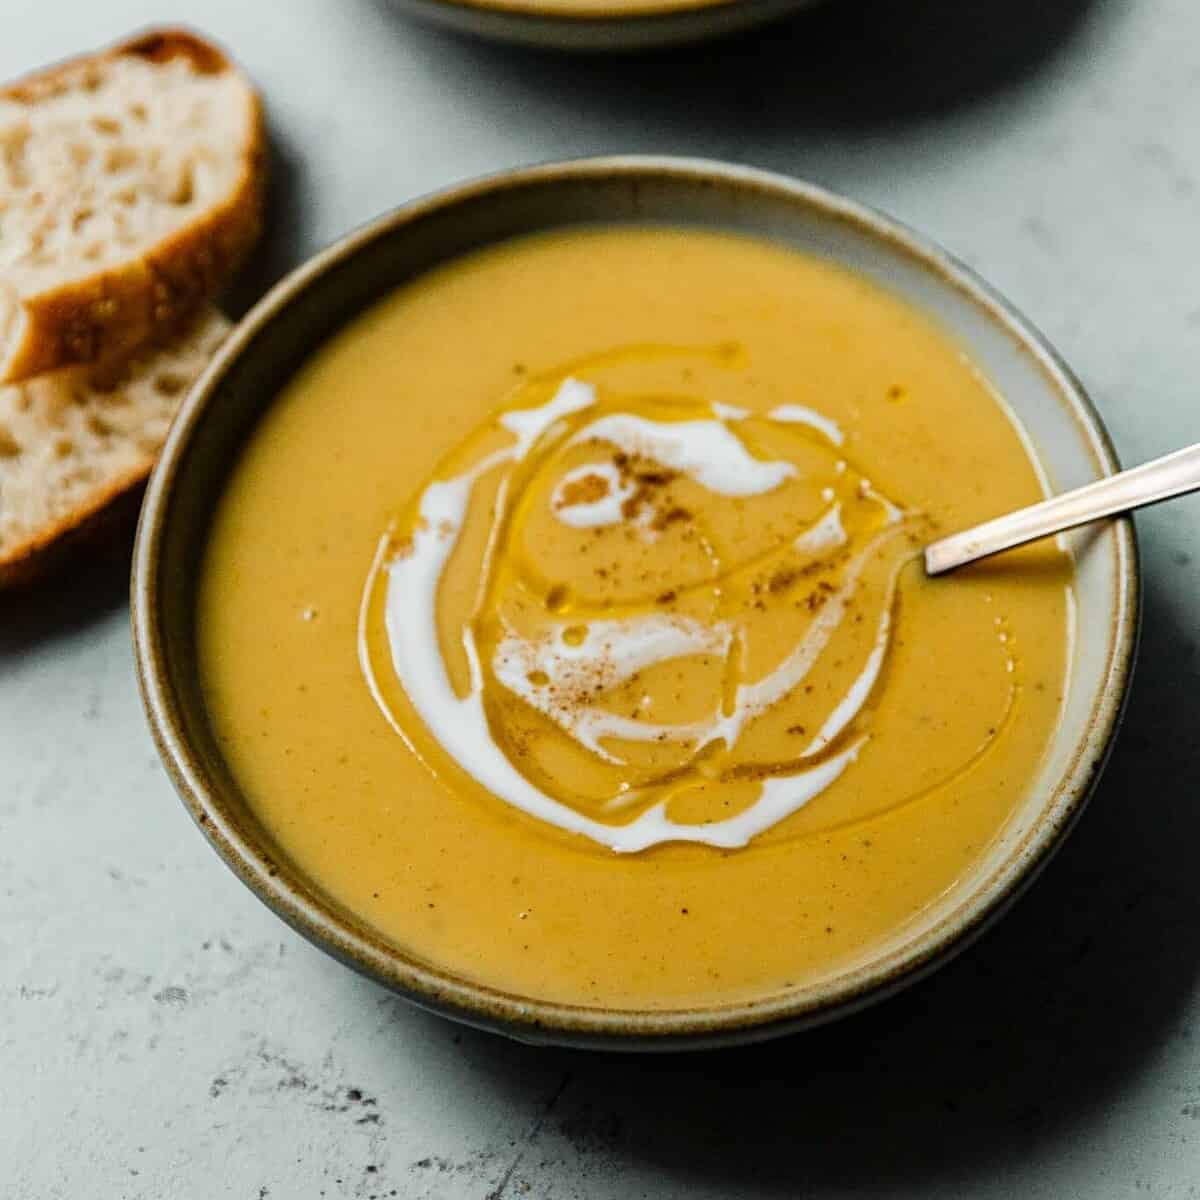  Get ready to cozy up with a warm bowl of Acorn Squash and Sweet Potato Soup!